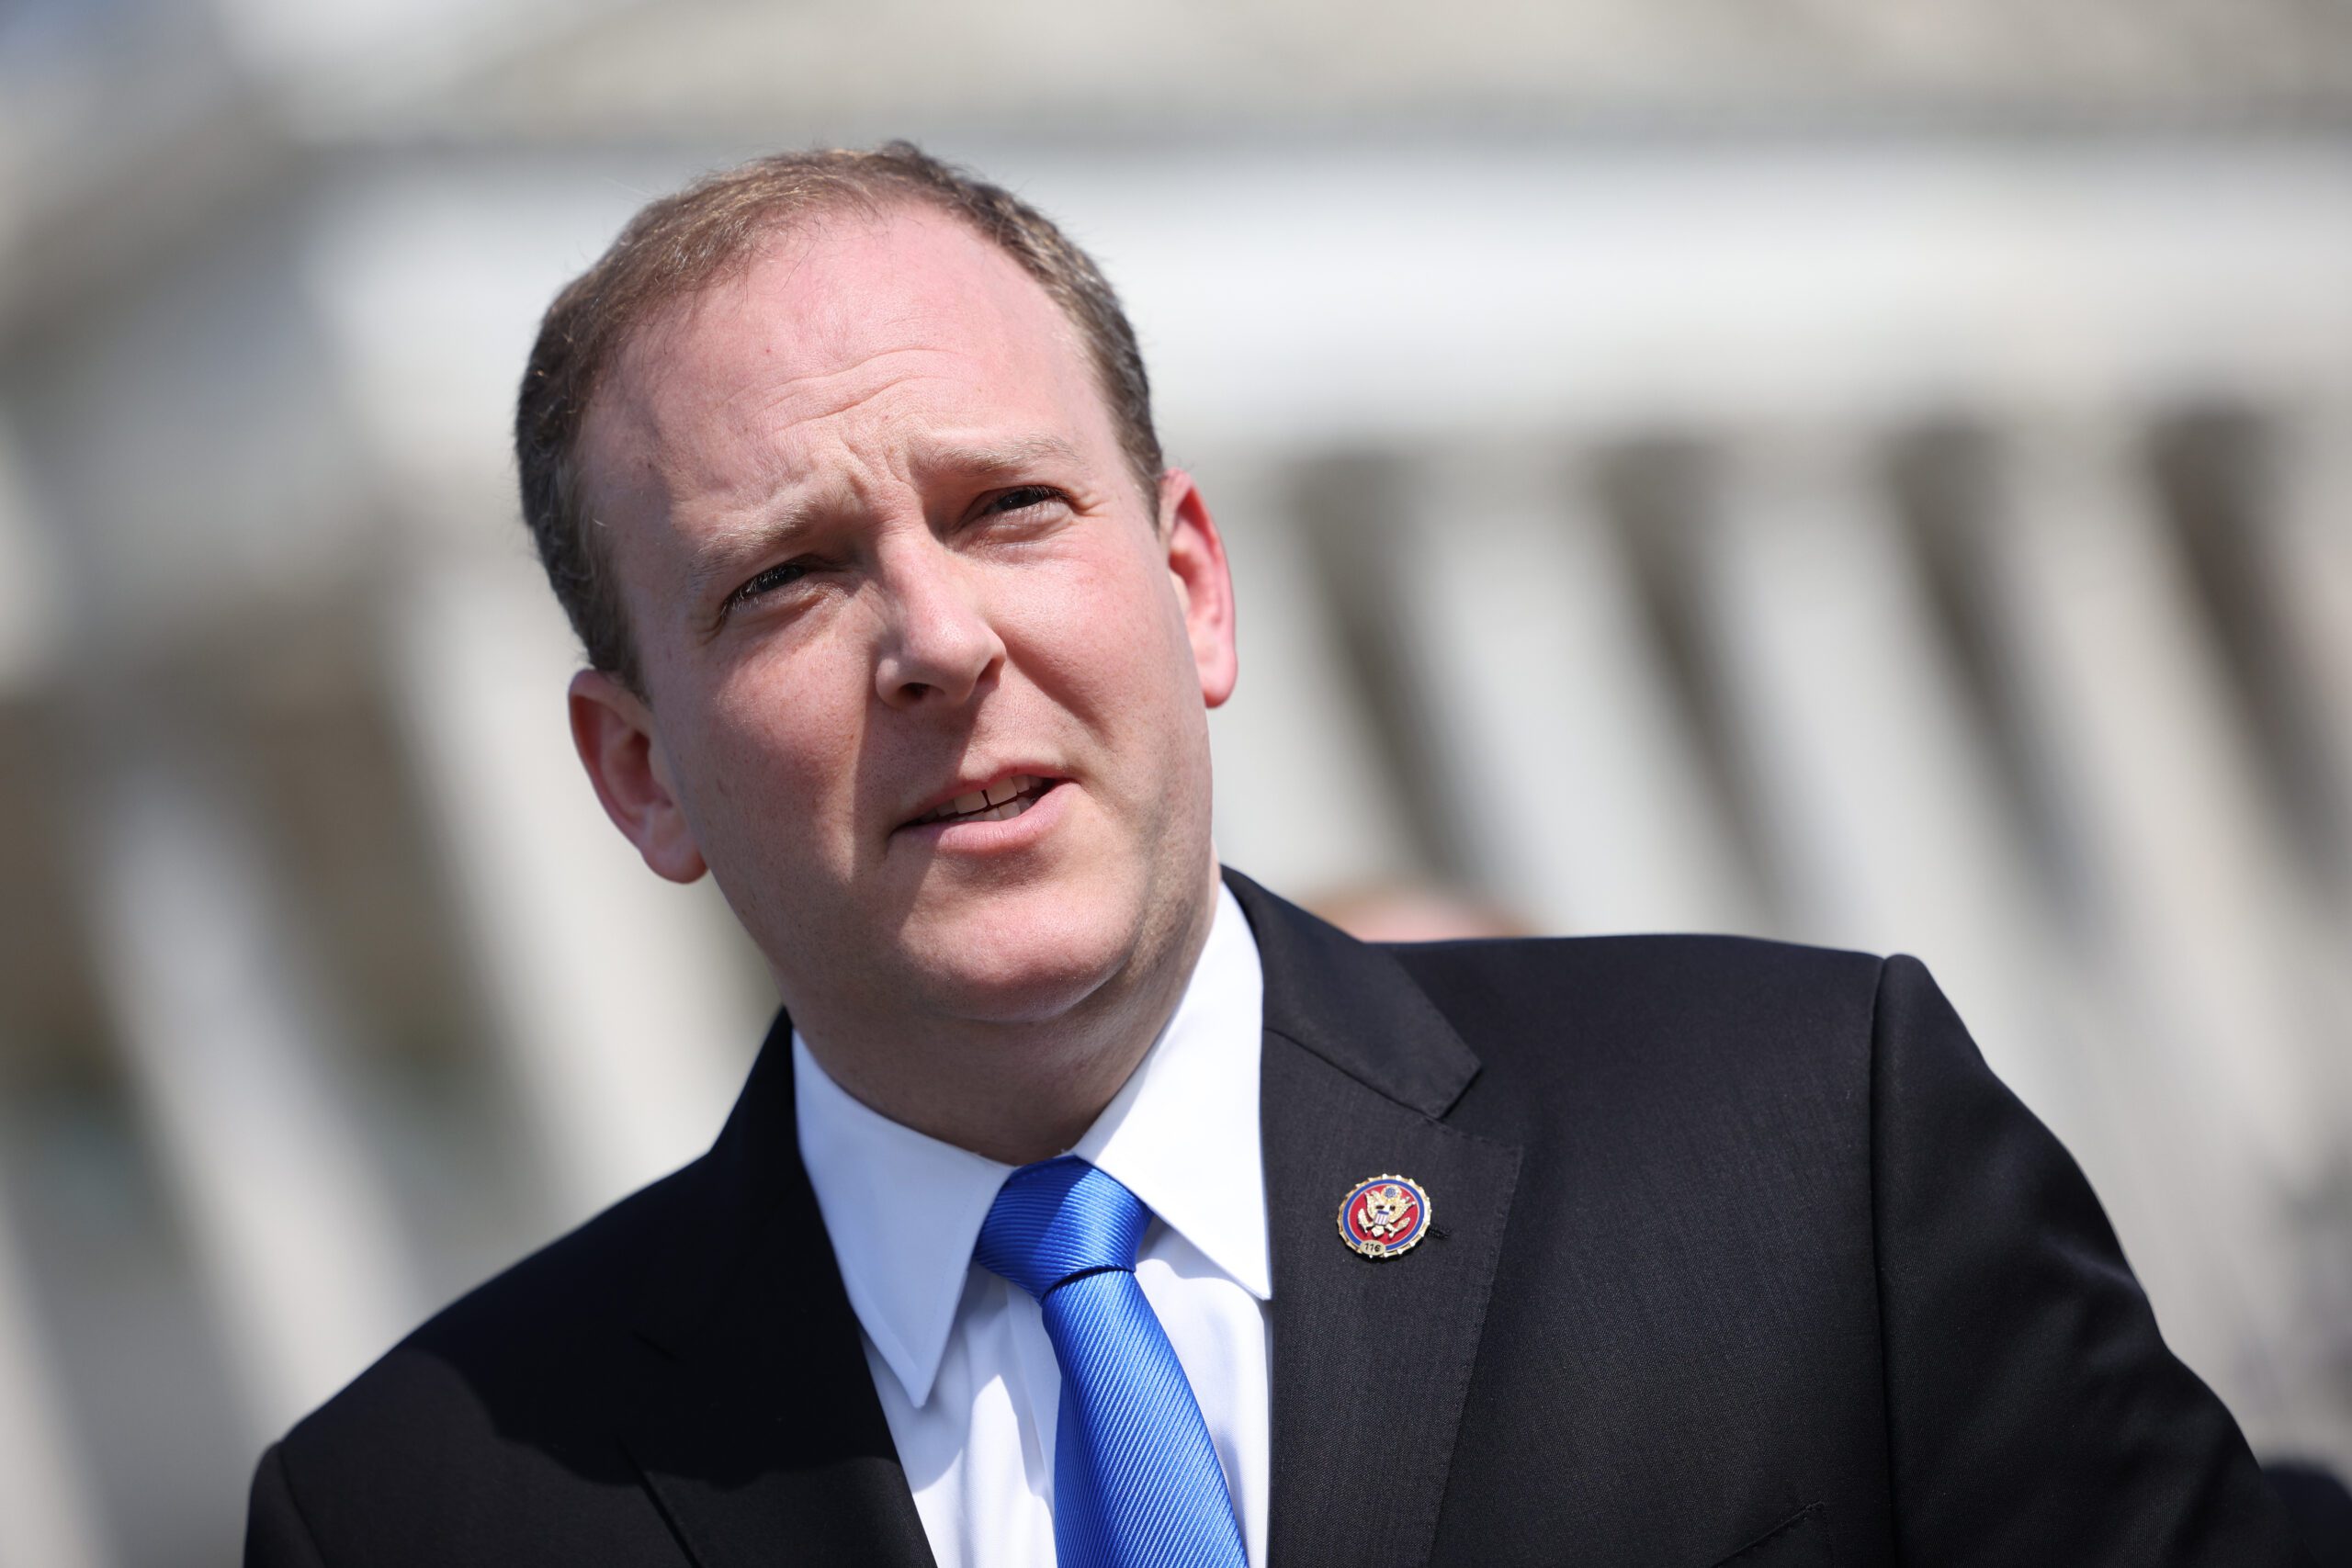 lee-zeldin-‘very-seriously-considering’-campaign-to-oust-ronna-mcdaniel-as-rnc-chair